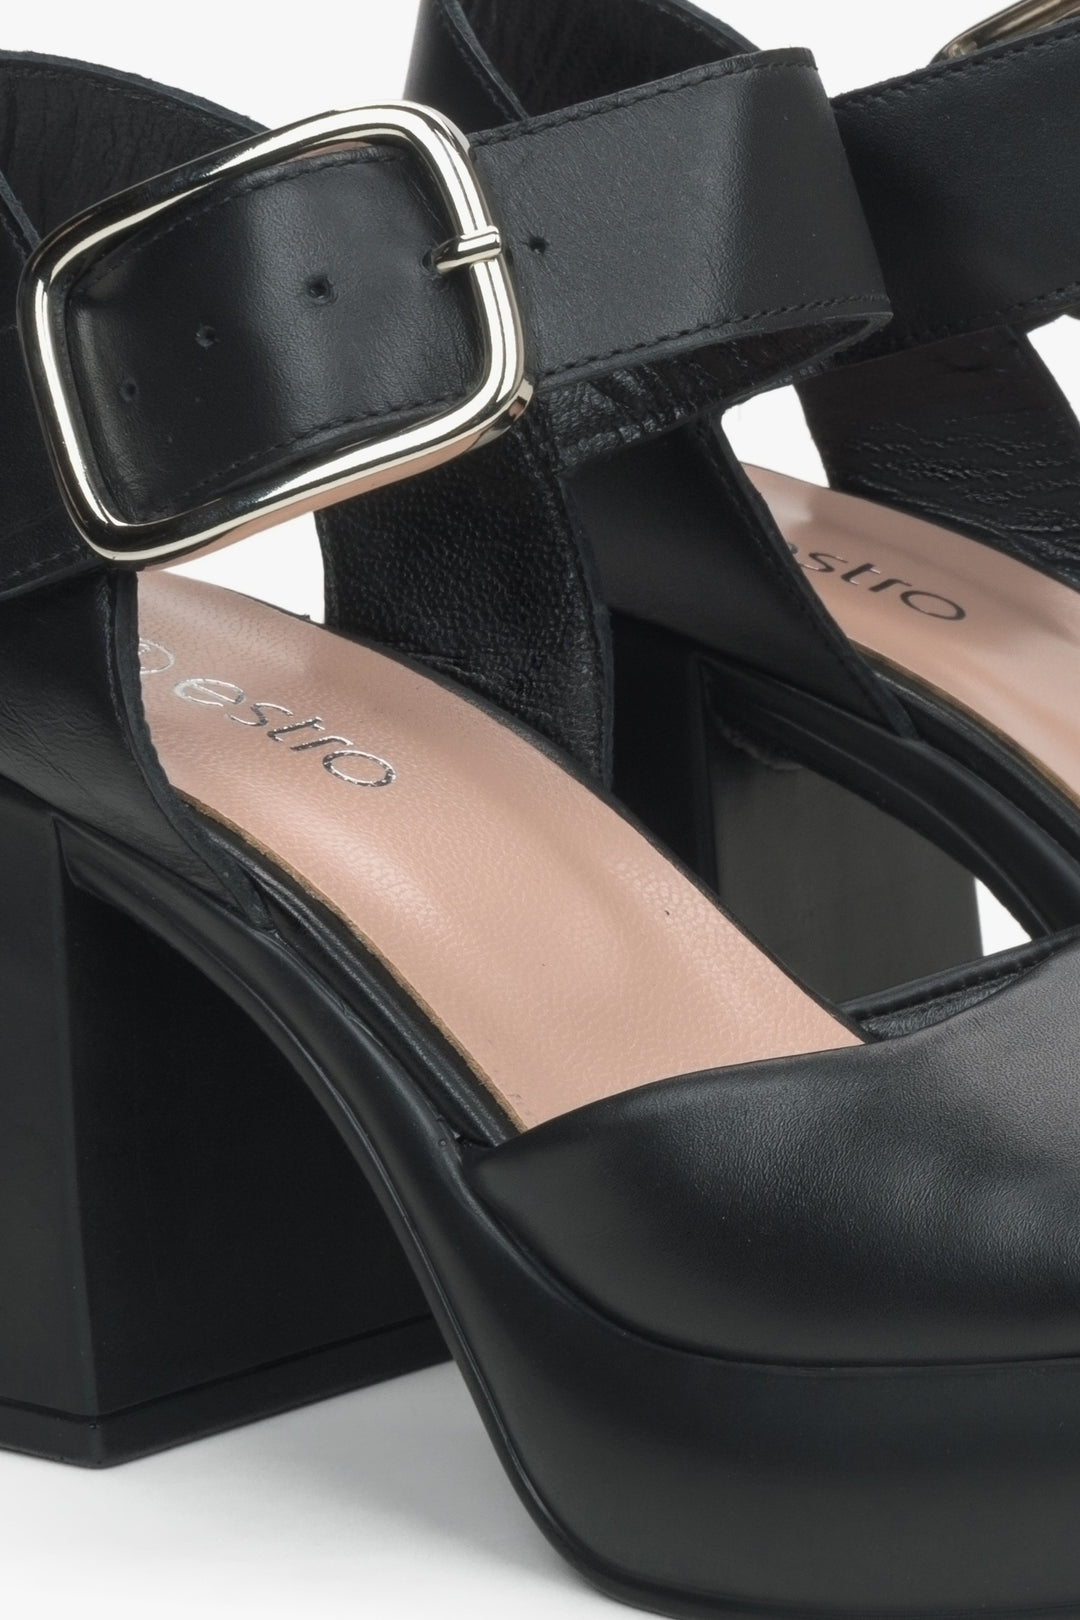 Women's black sandals with a stable heel by Estro - close-up on the detail.